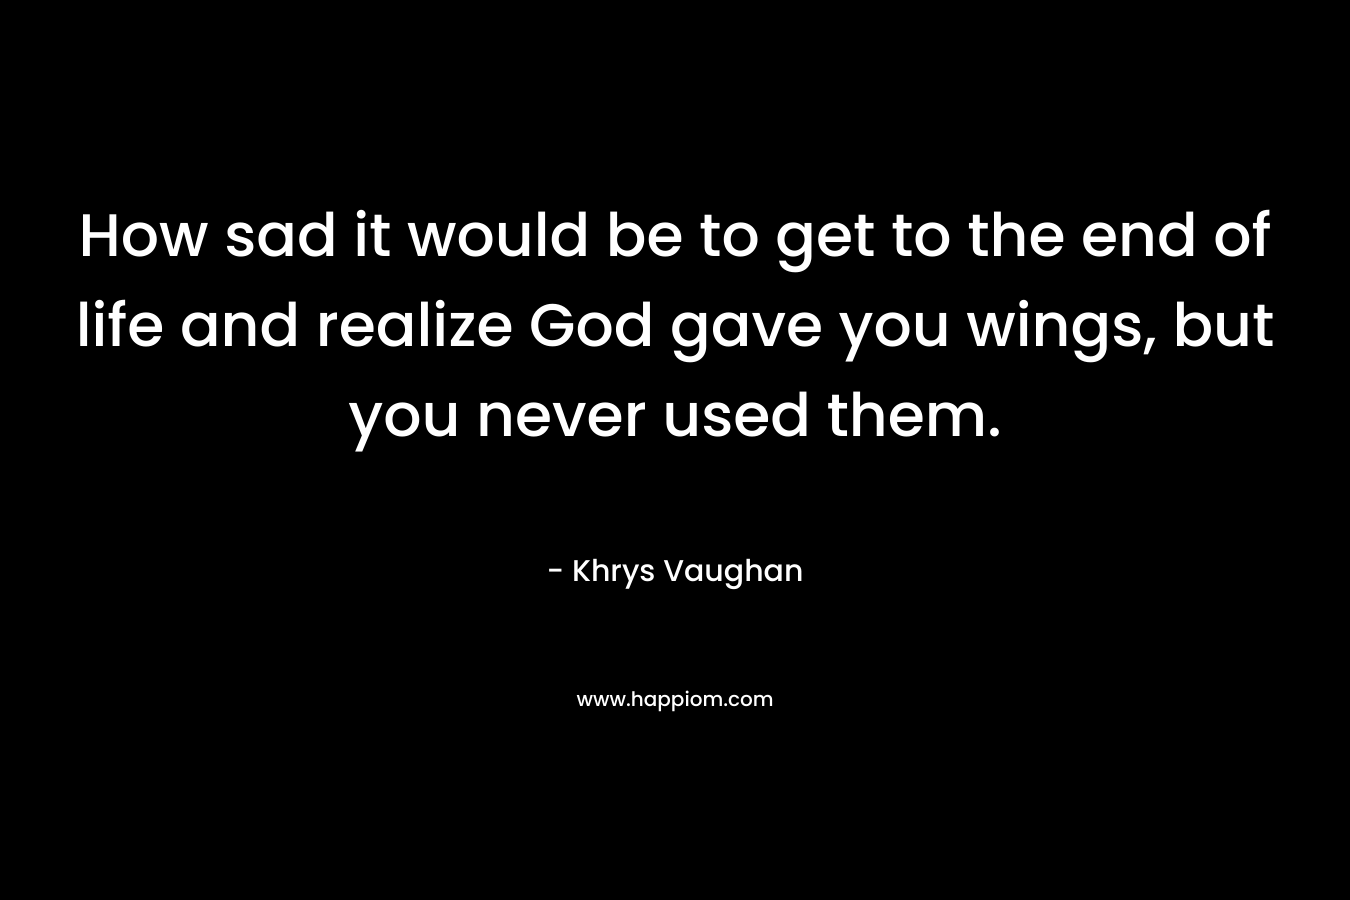 How sad it would be to get to the end of life and realize God gave you wings, but you never used them. – Khrys Vaughan